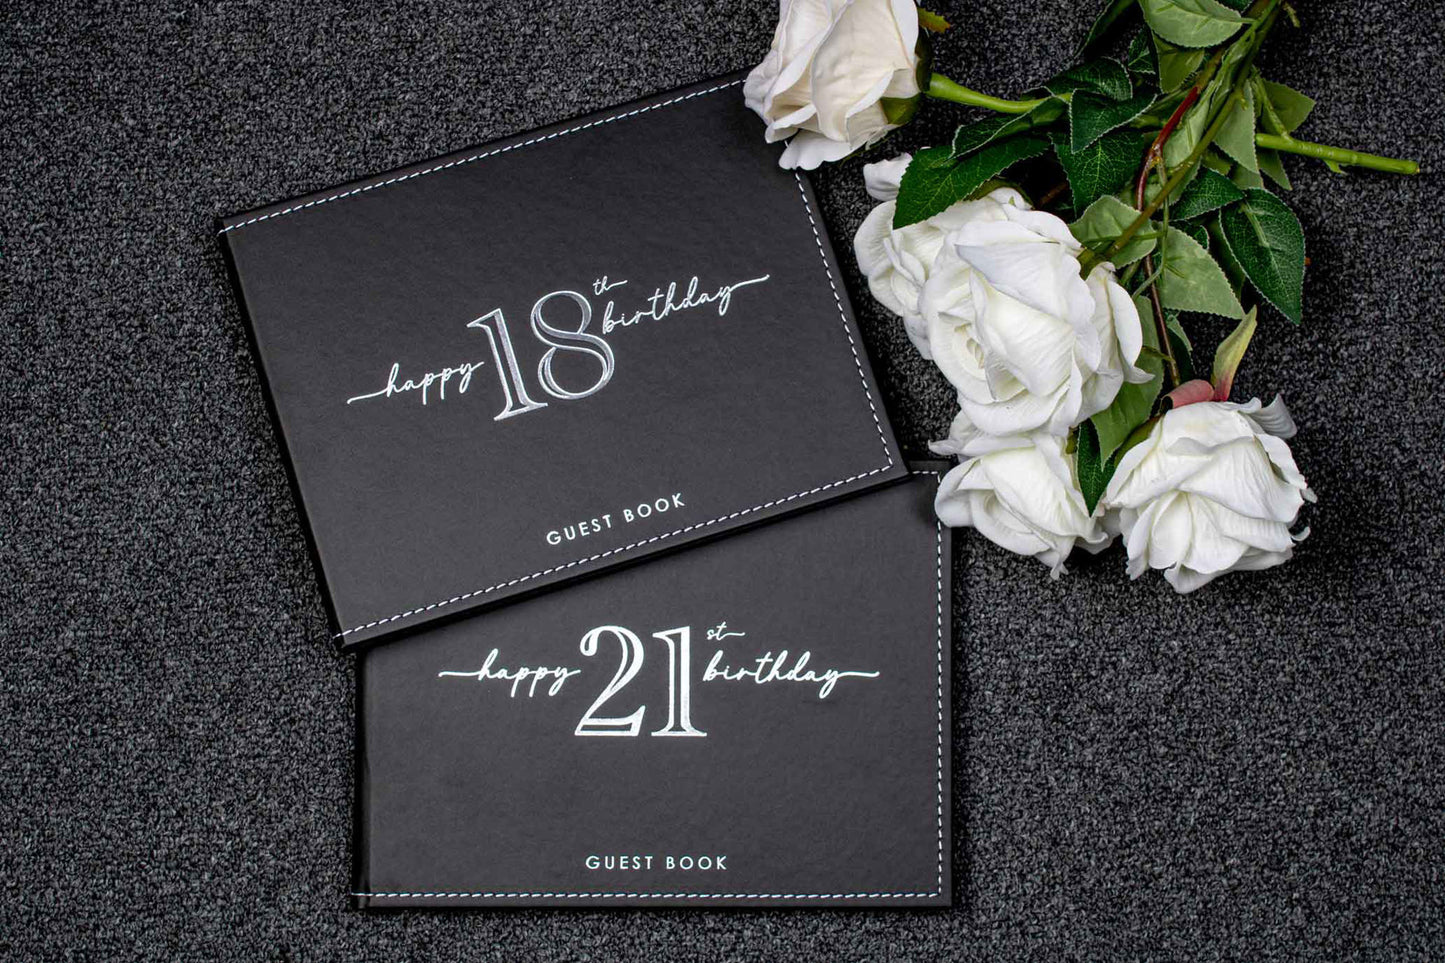 GUEST BOOK BLACK WITH SILVER WRITING 21ST BIRTHDAY